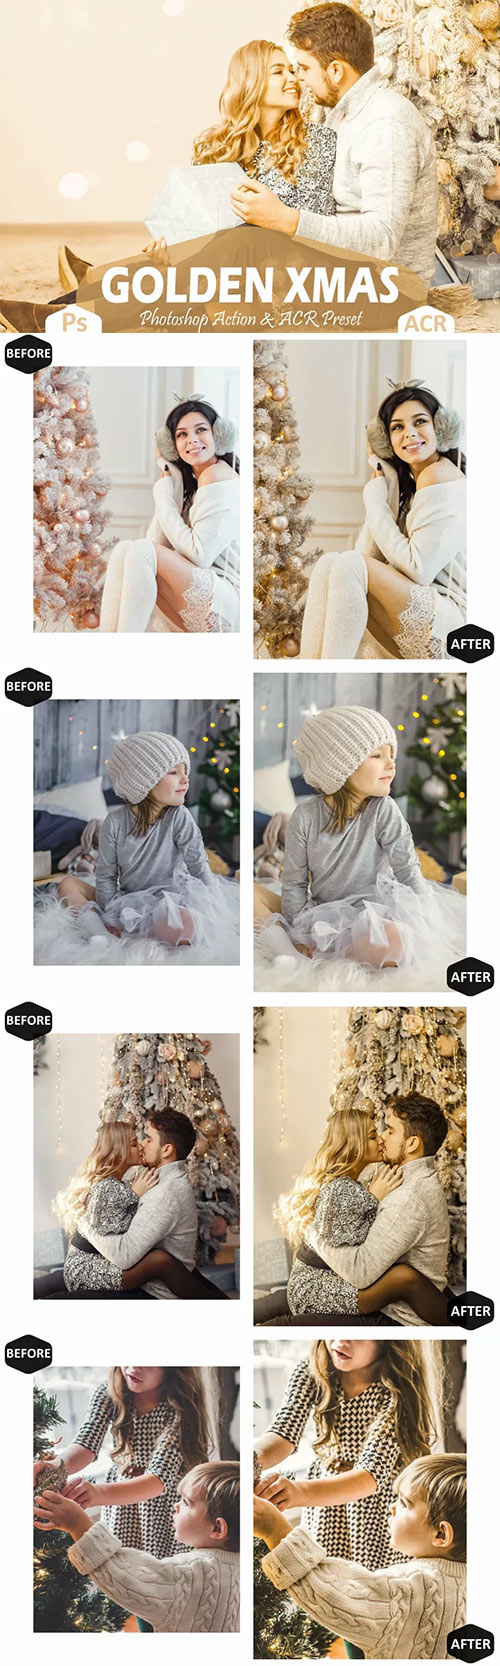 10 Golden Xmas Photoshop Actions And ACR Presets 1630259